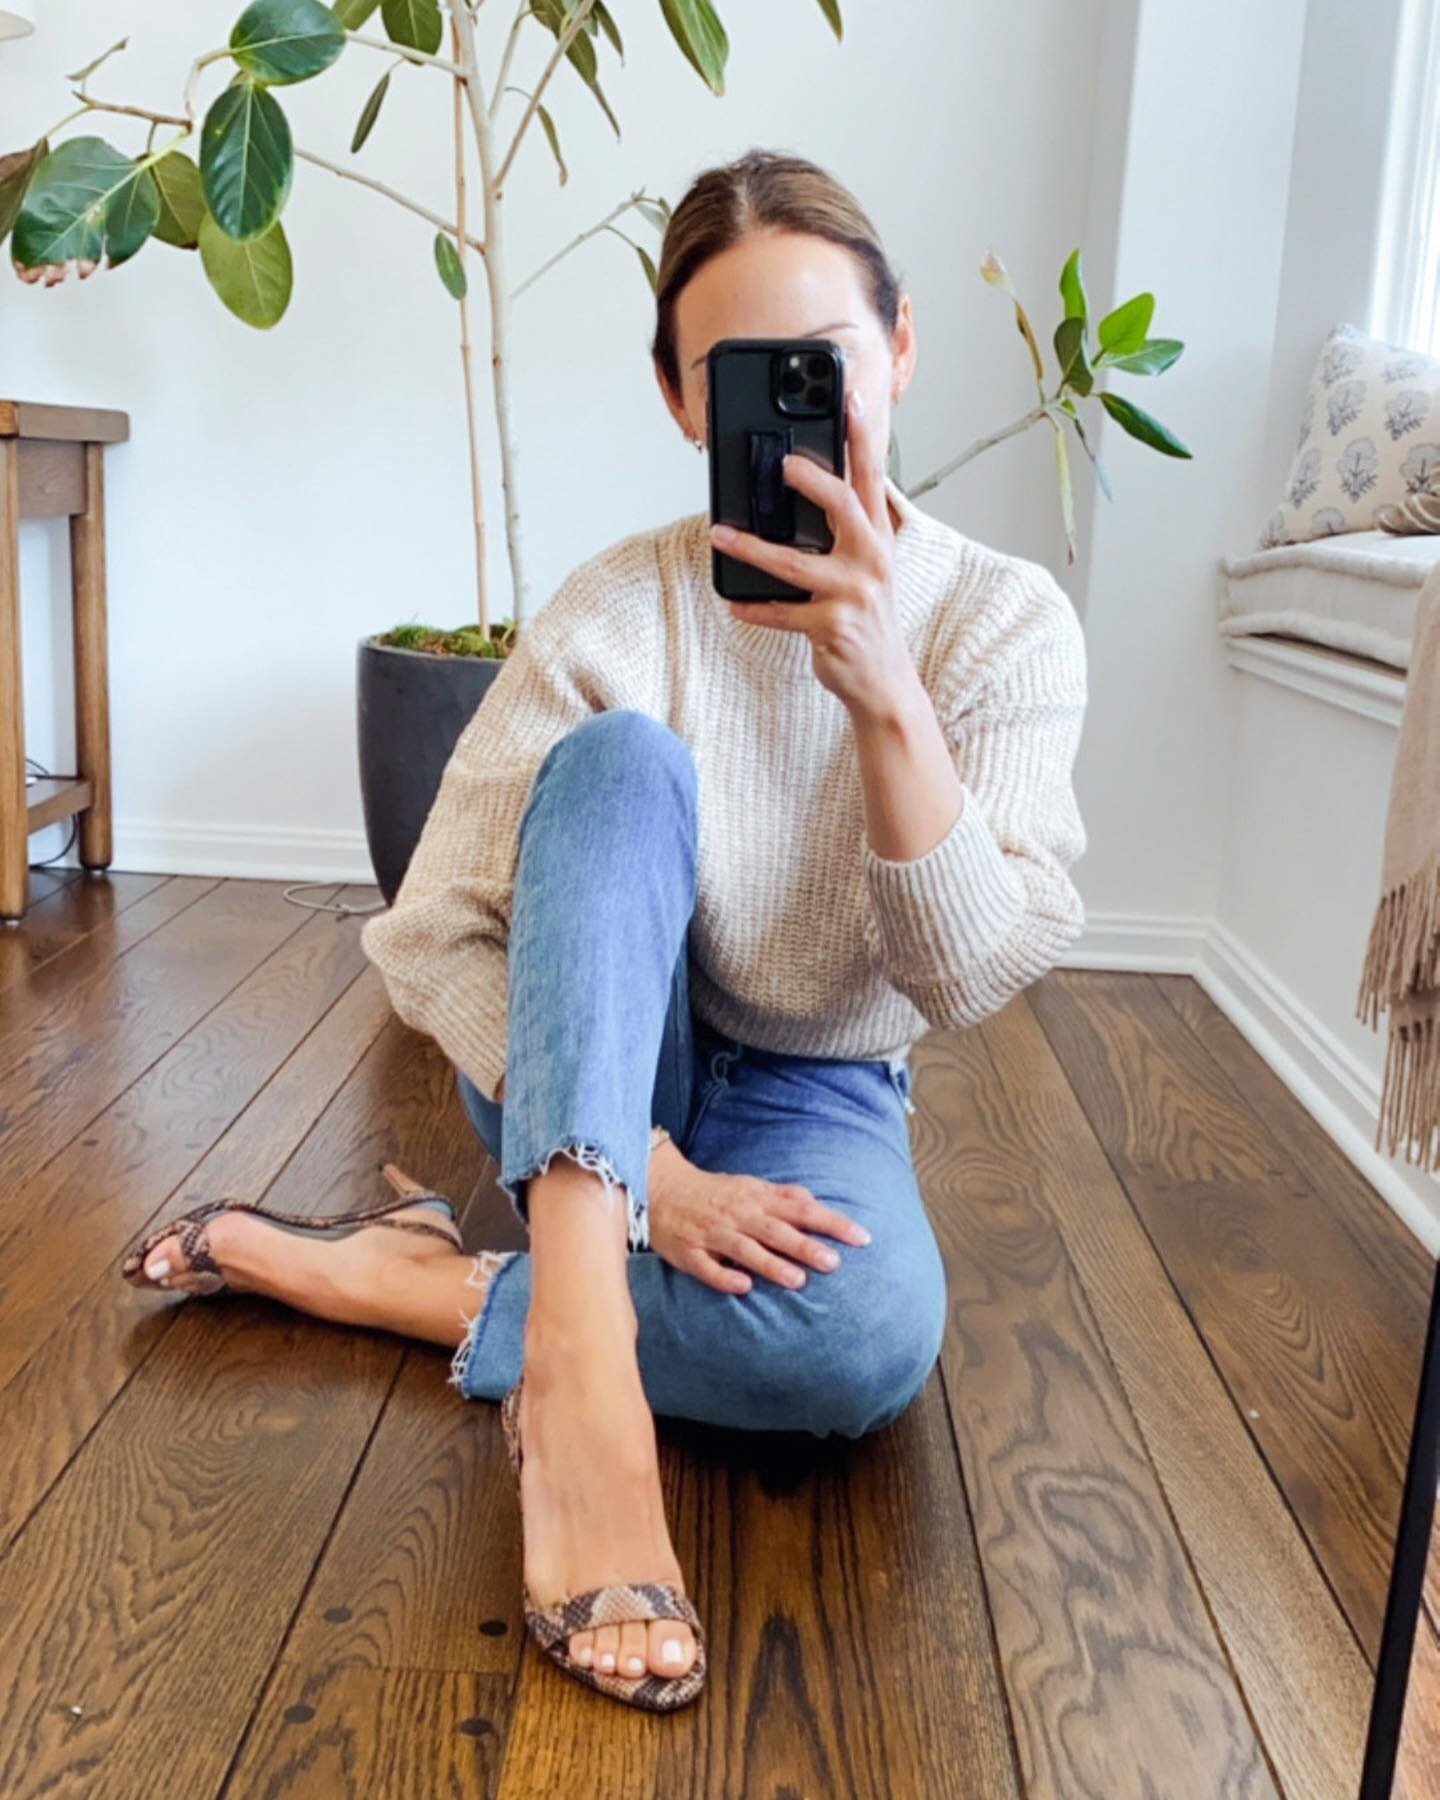 I have two new brands to put on your radar, @lblc_thelabel and @aeranewyork. I have mentioned Aera in previous posts but am highlighting them again for becoming a mainstay in my closet in the vegan luxury footwear department and for being transparent